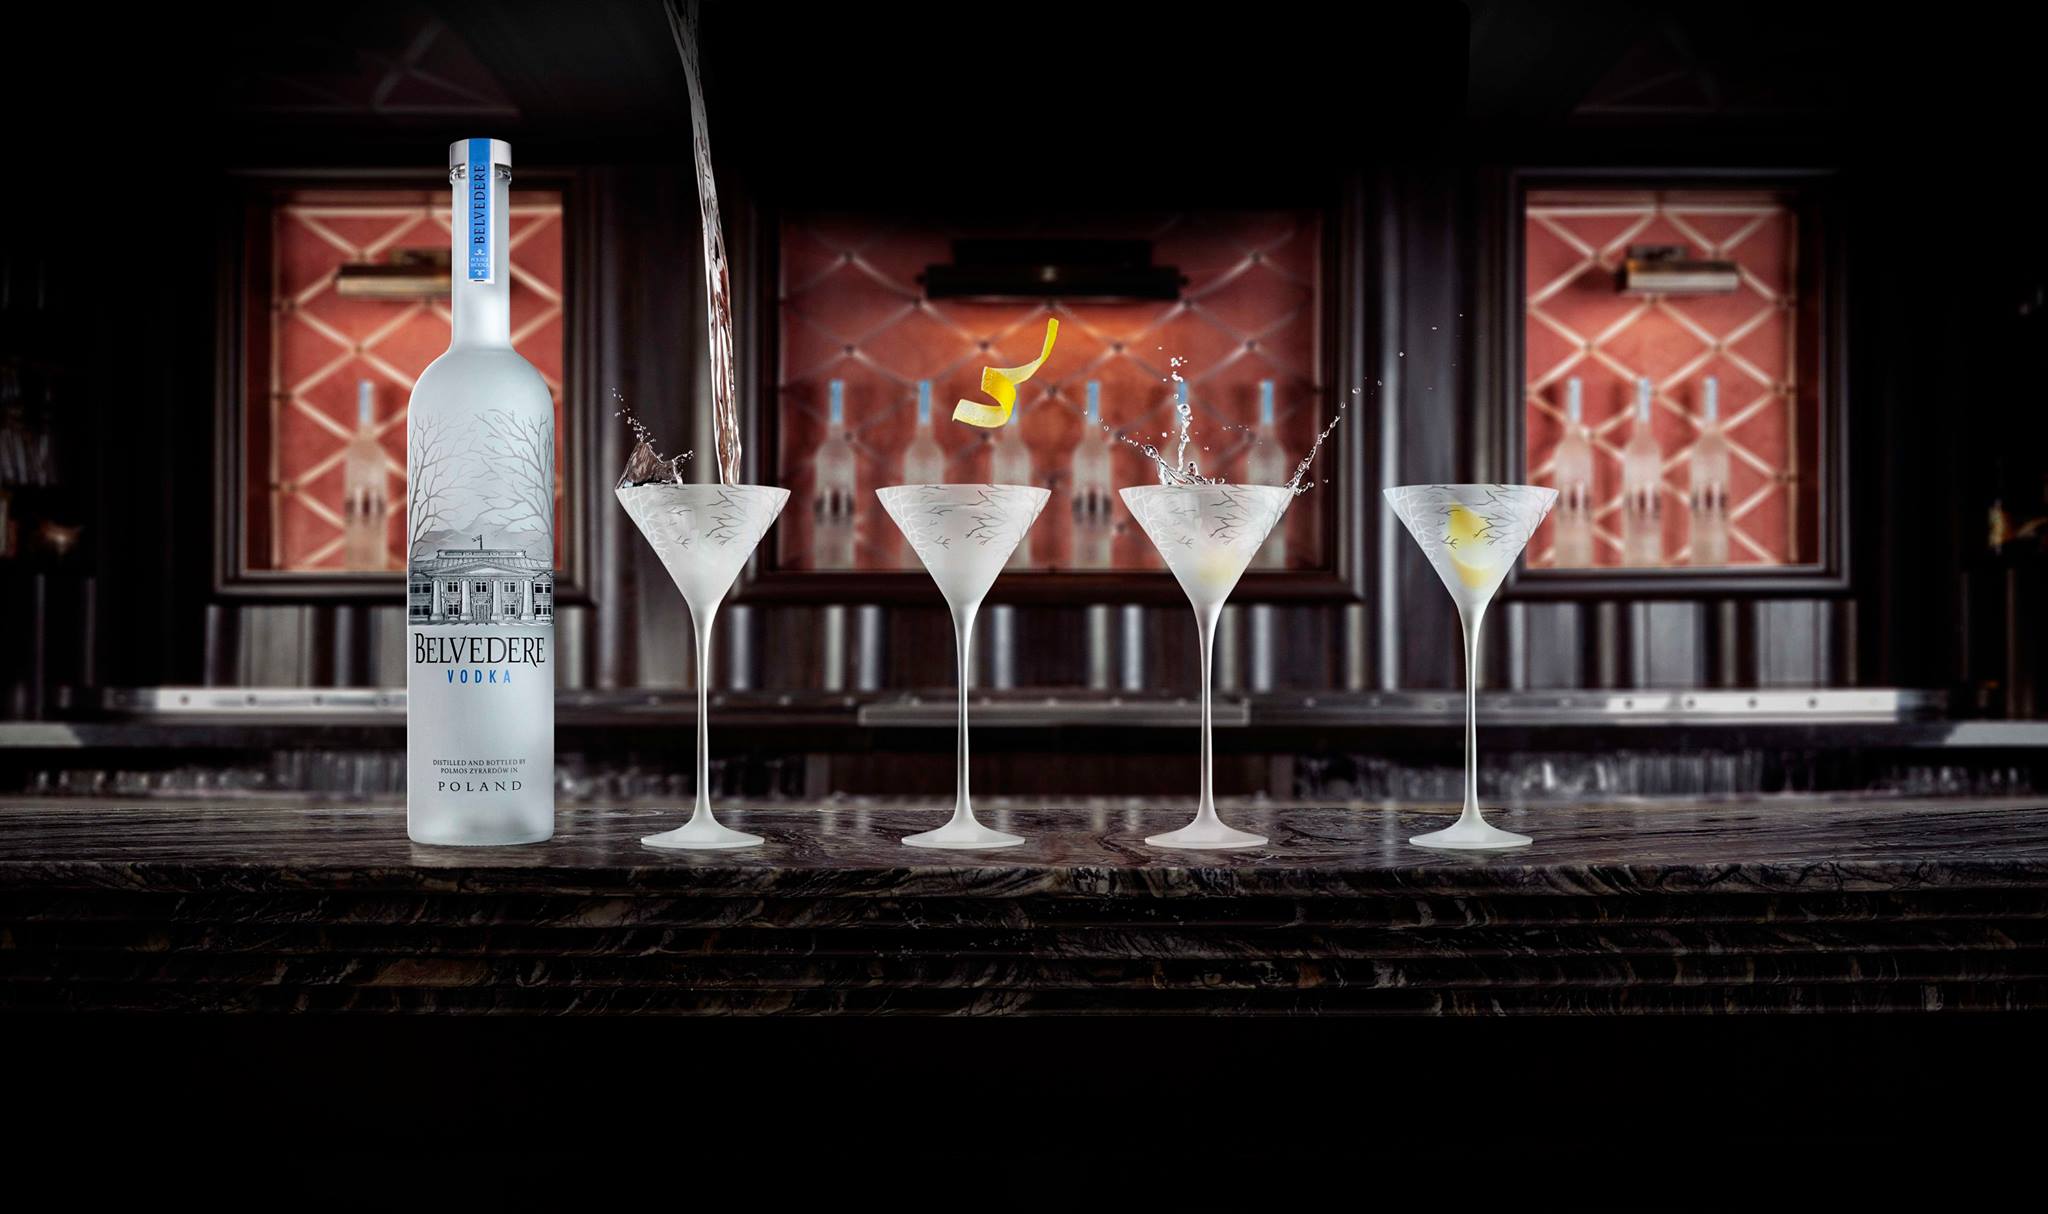 Belvedere Vodka has been awarded ‘Vodka Producer of the Year’ for the third consecutive year at the International Spirits Challenge.